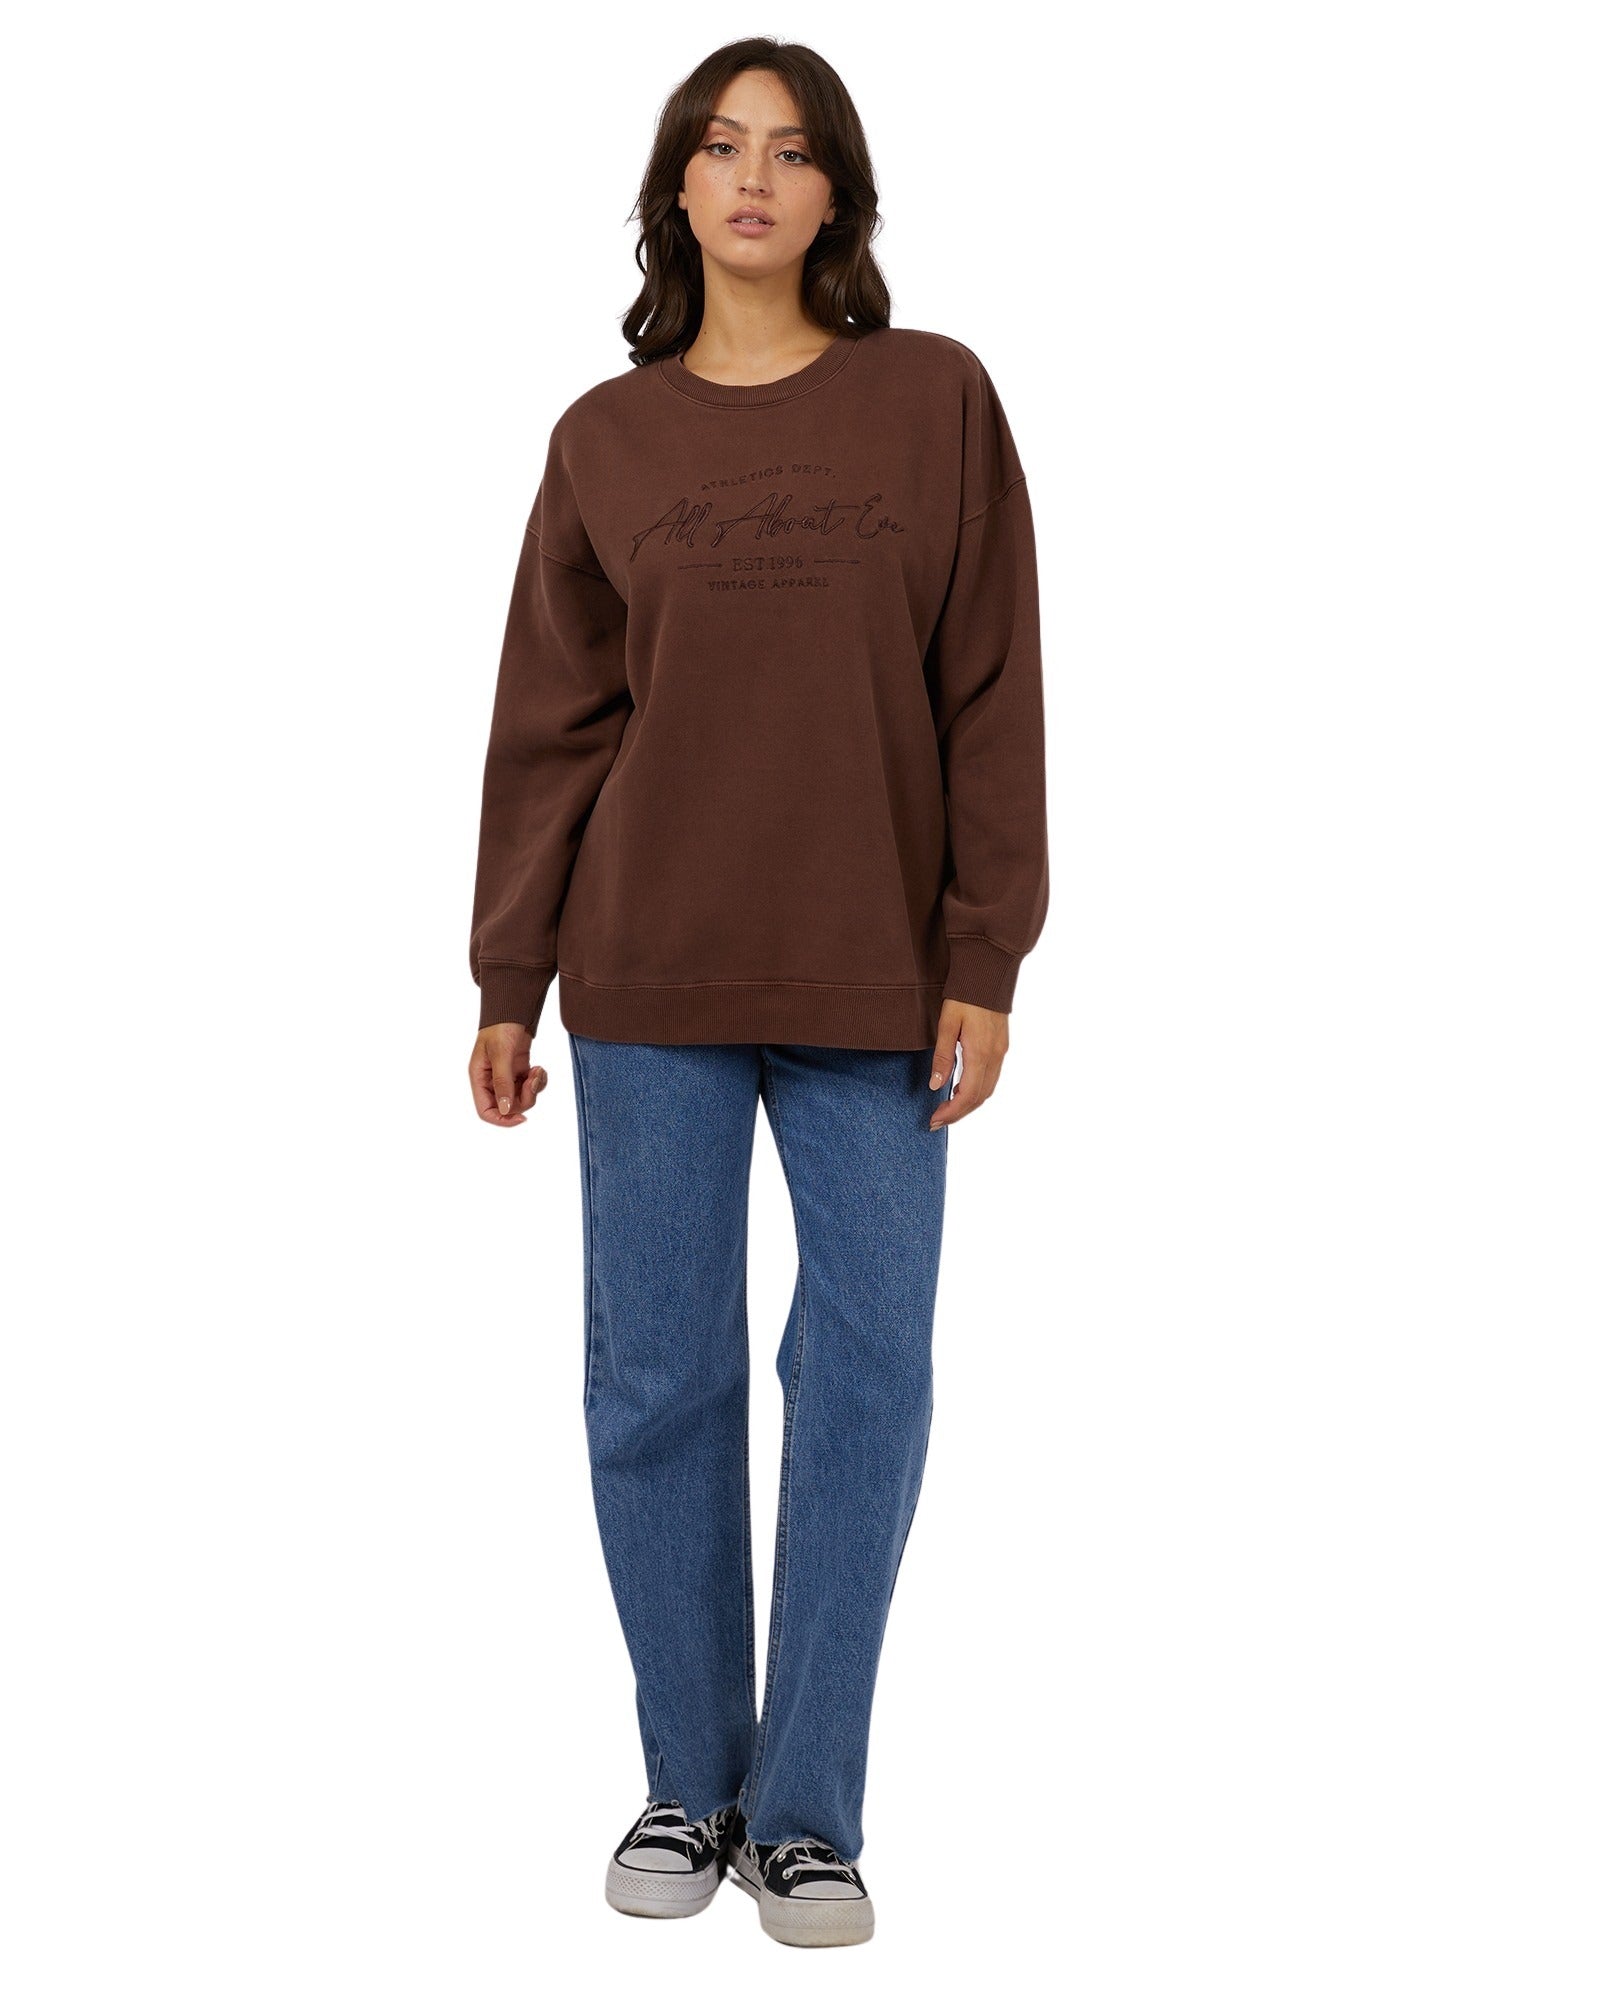 All About Eve - Classic Crew - Brown